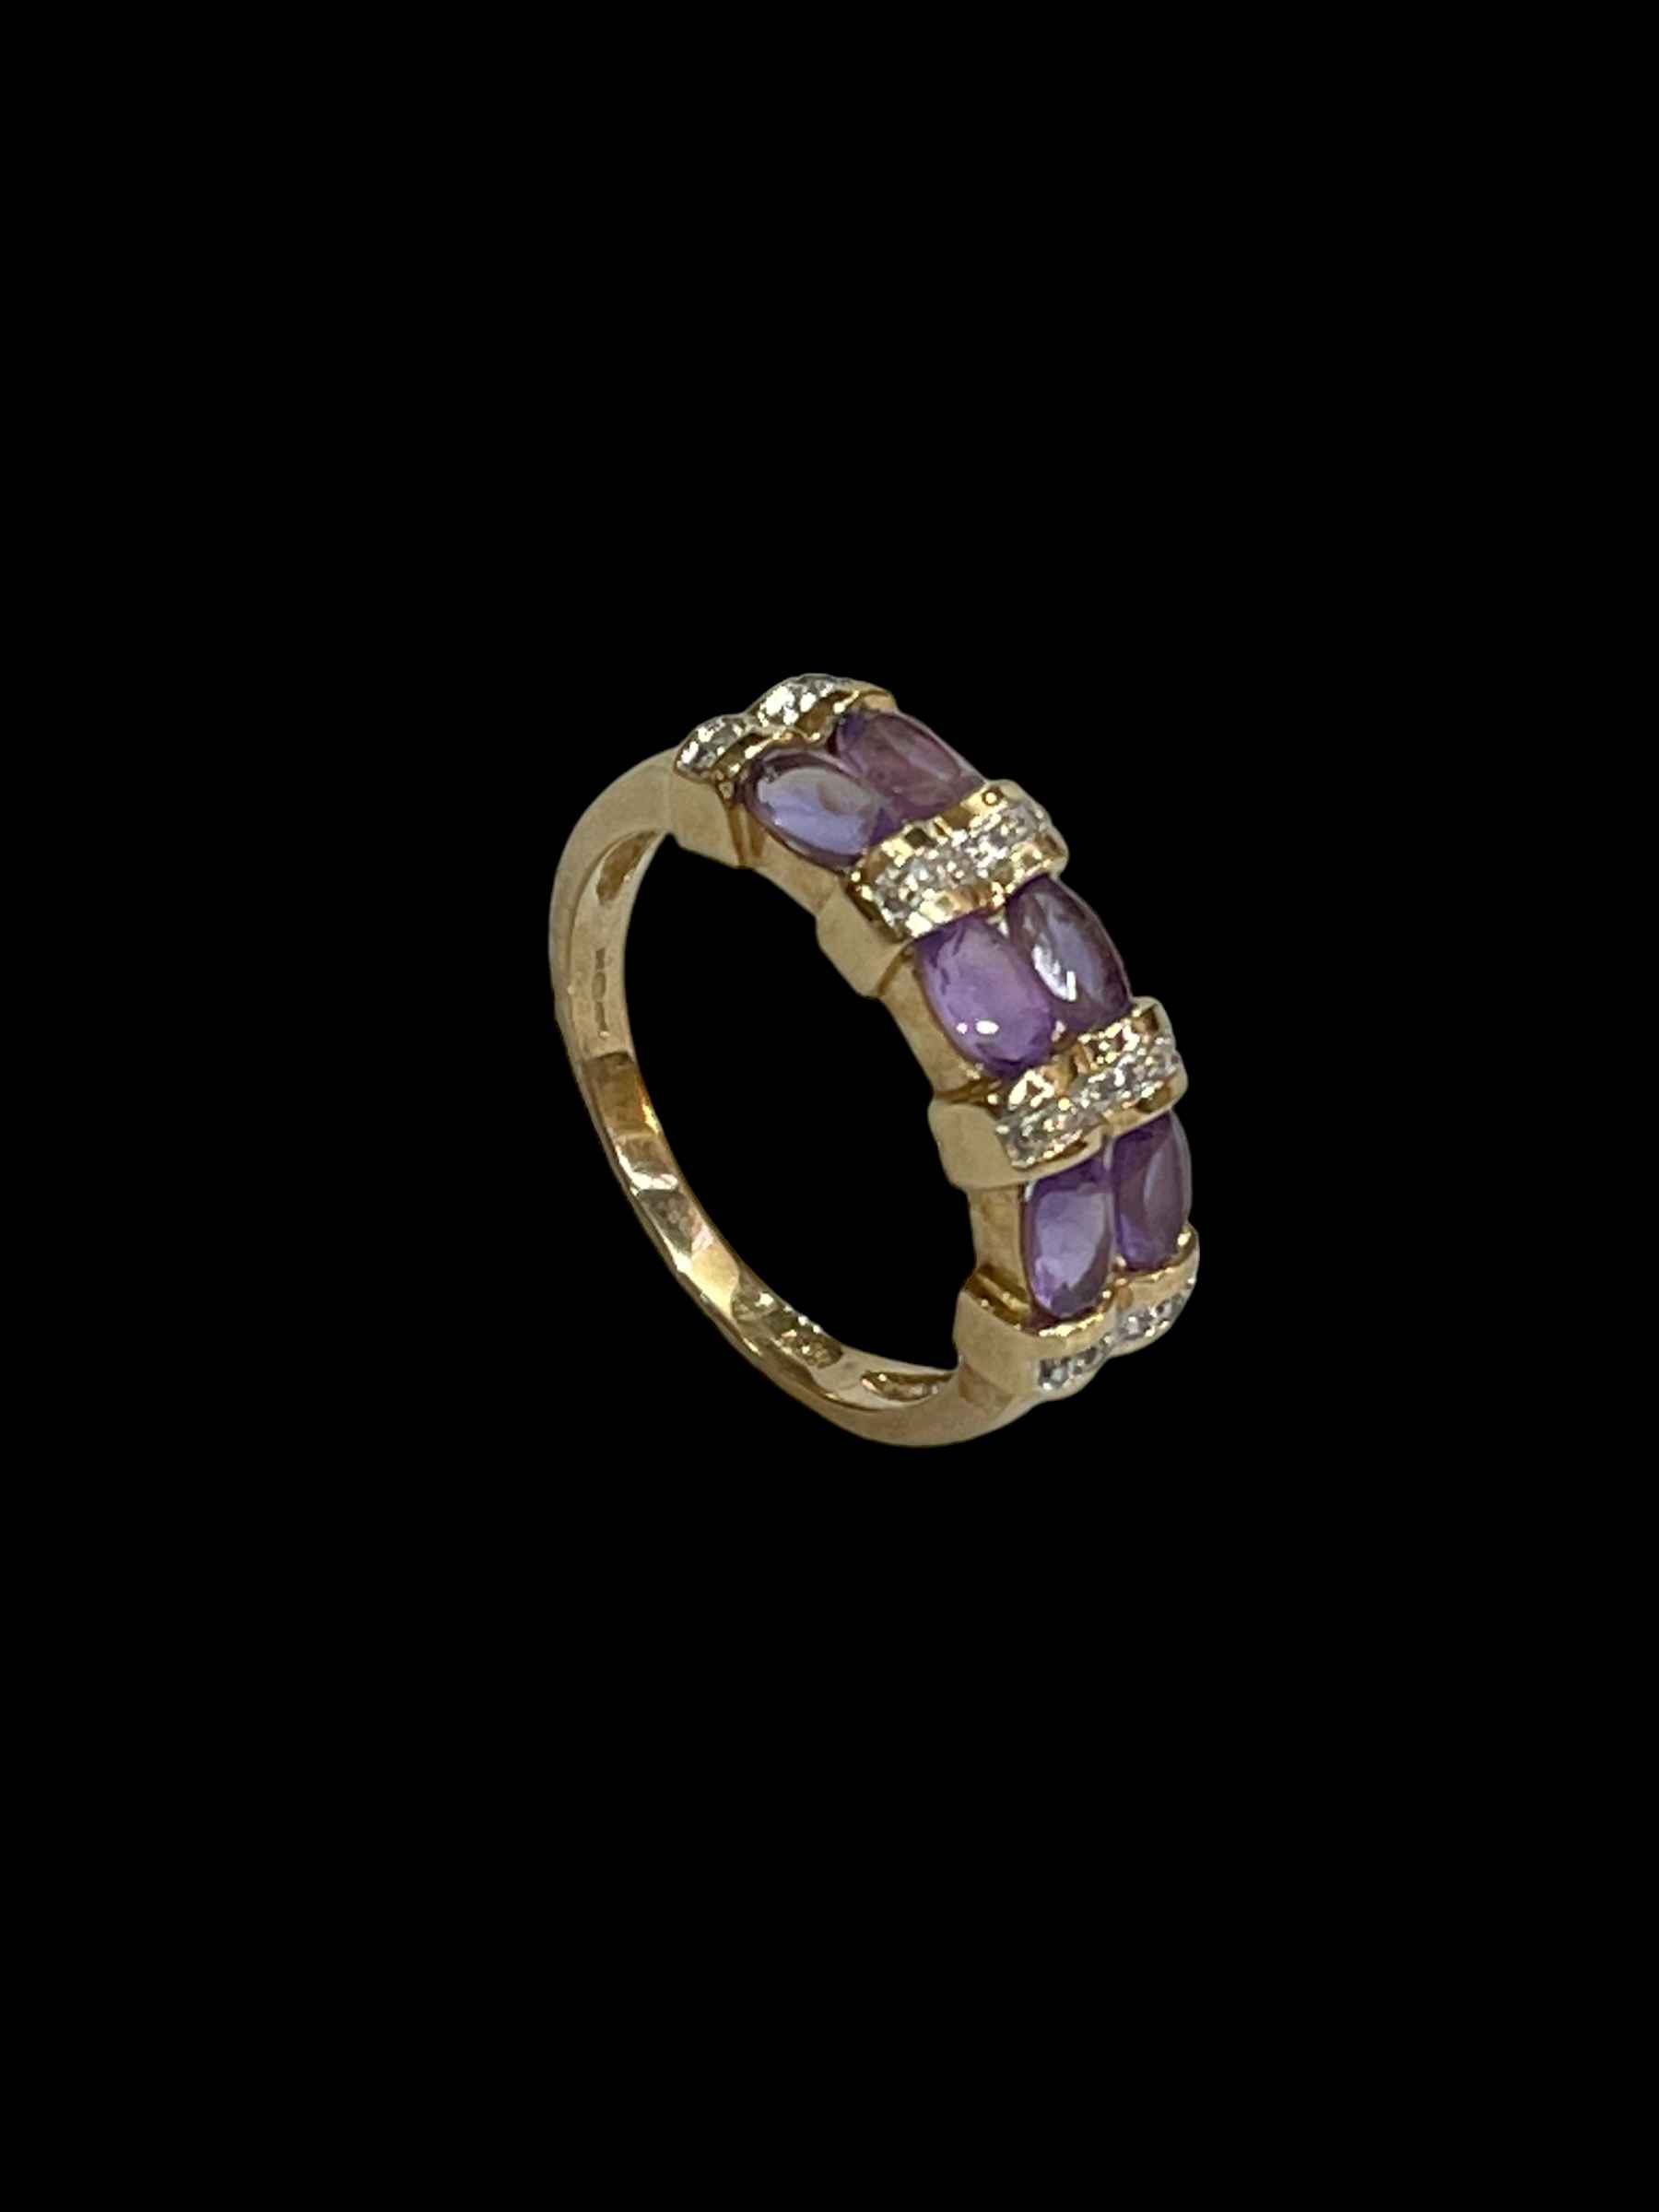 Amethyst and diamond 9 carat gold ring, size O.